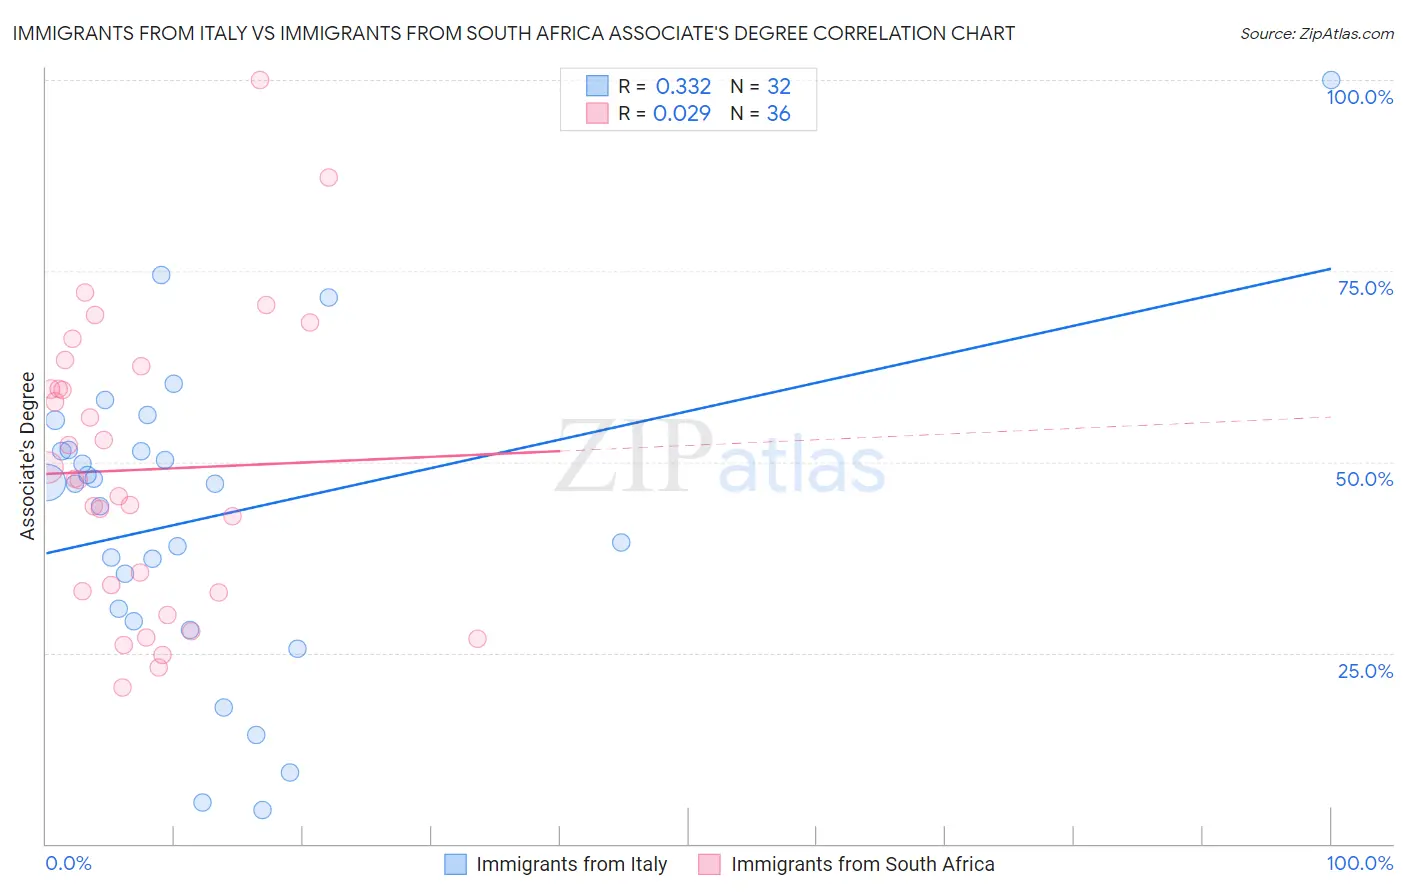 Immigrants from Italy vs Immigrants from South Africa Associate's Degree